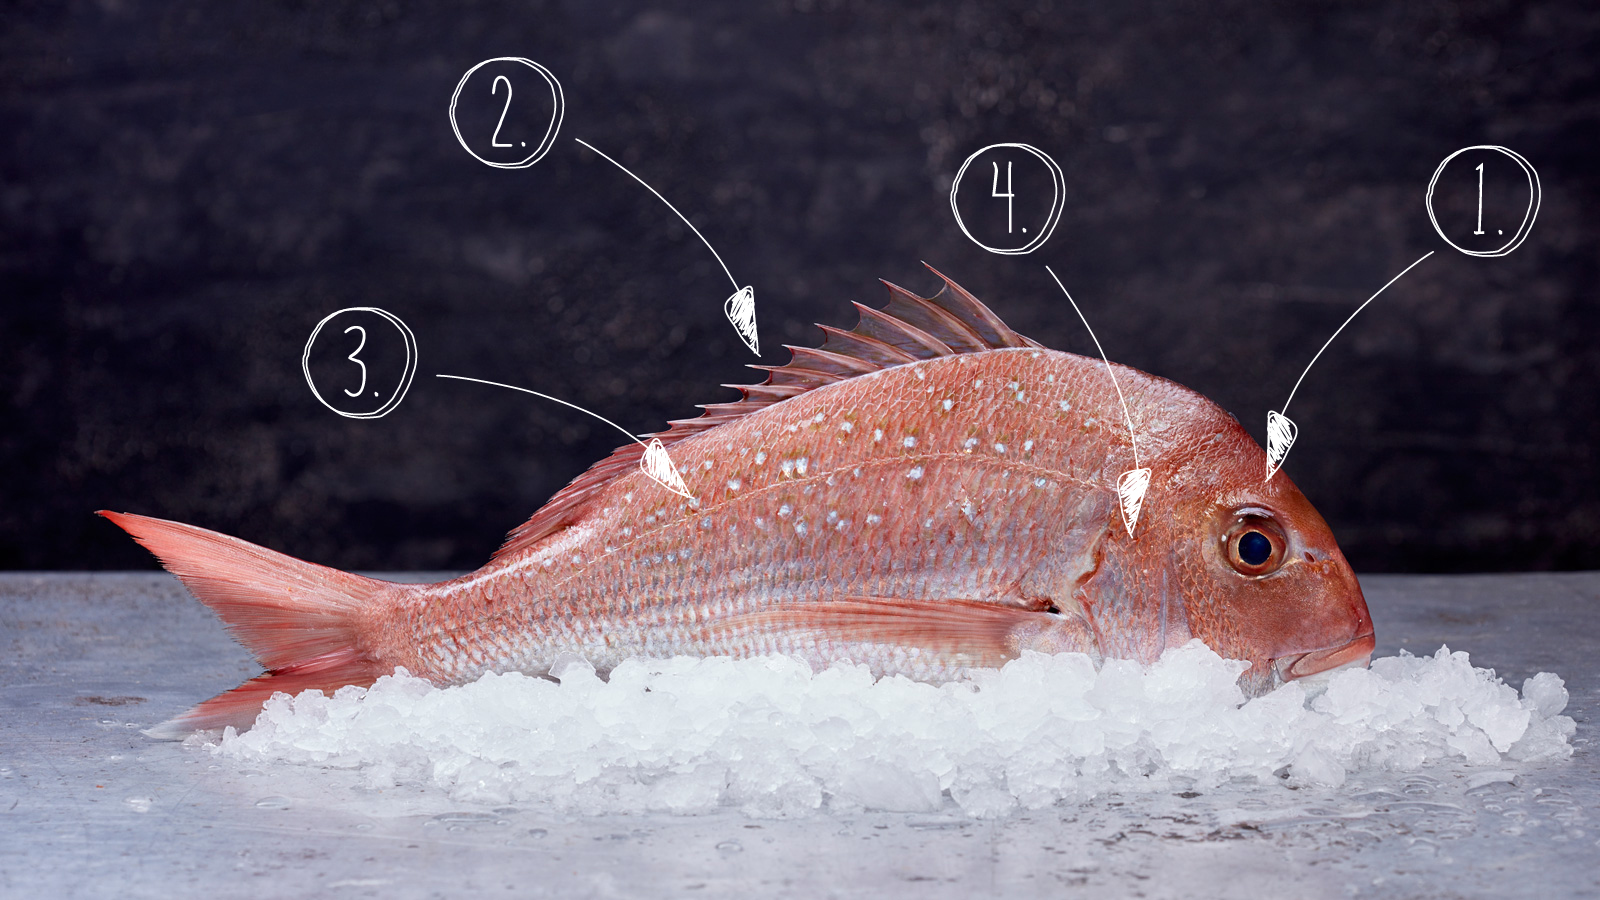 How to tell if a fish is fresh